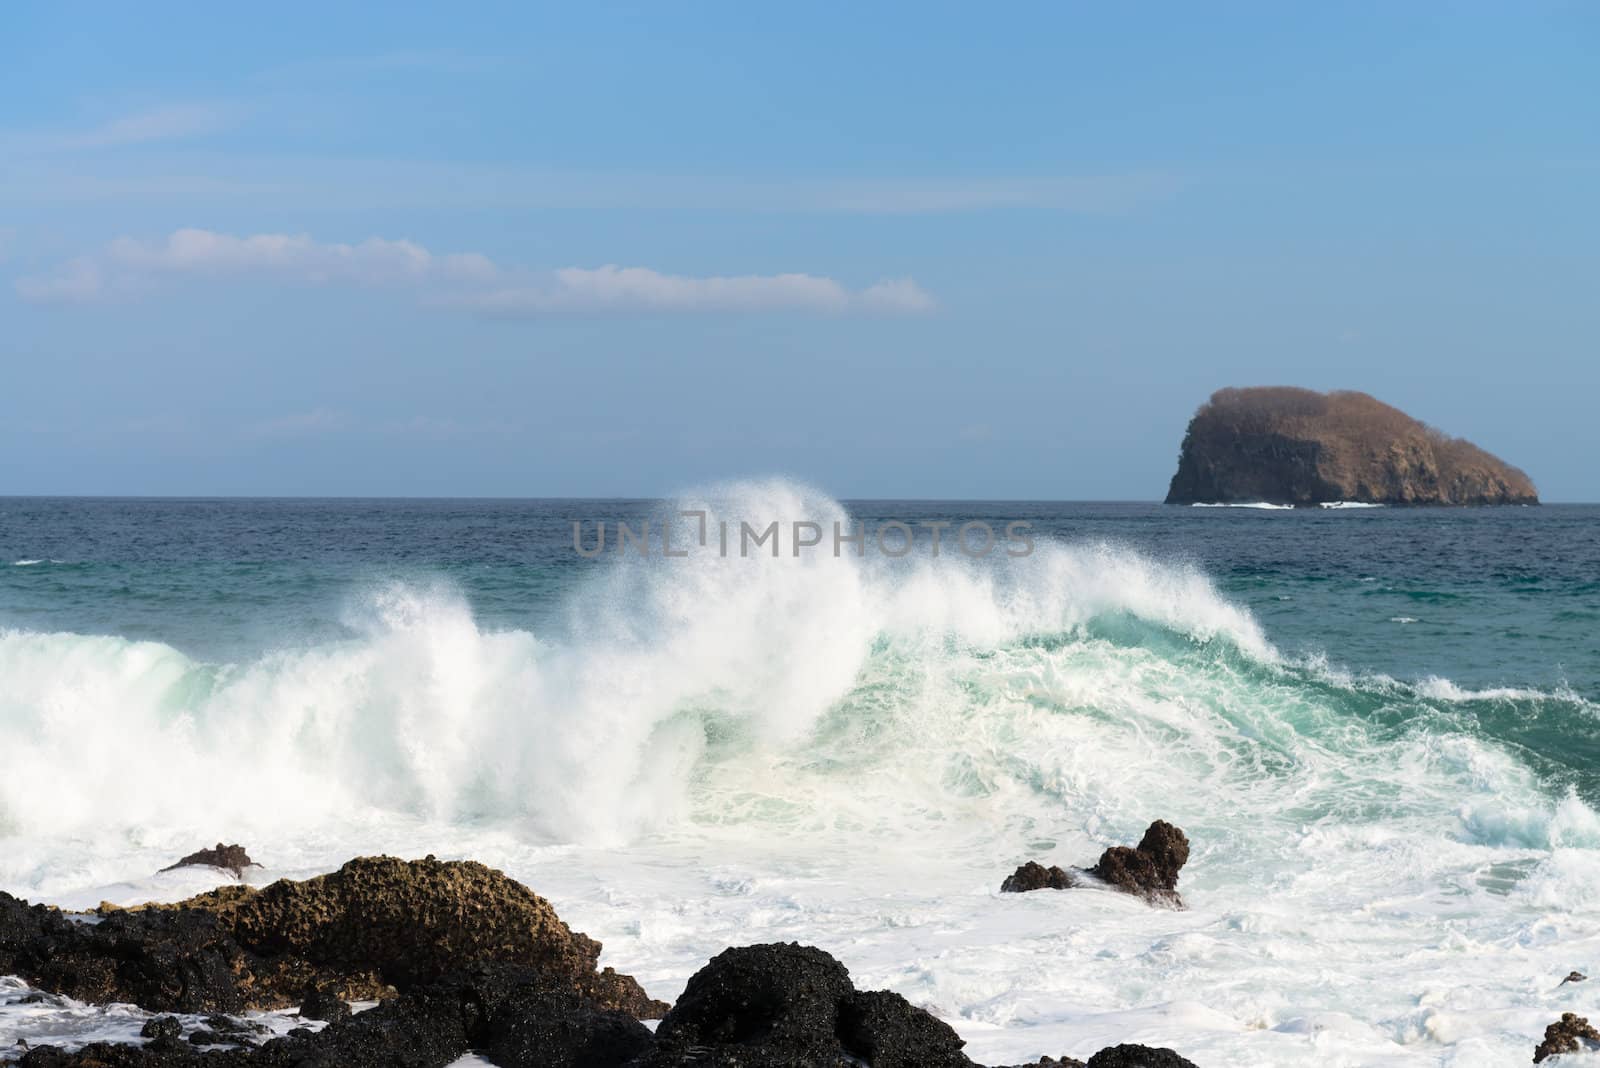 Waves breaking on a stony beach under blue sky and island on background